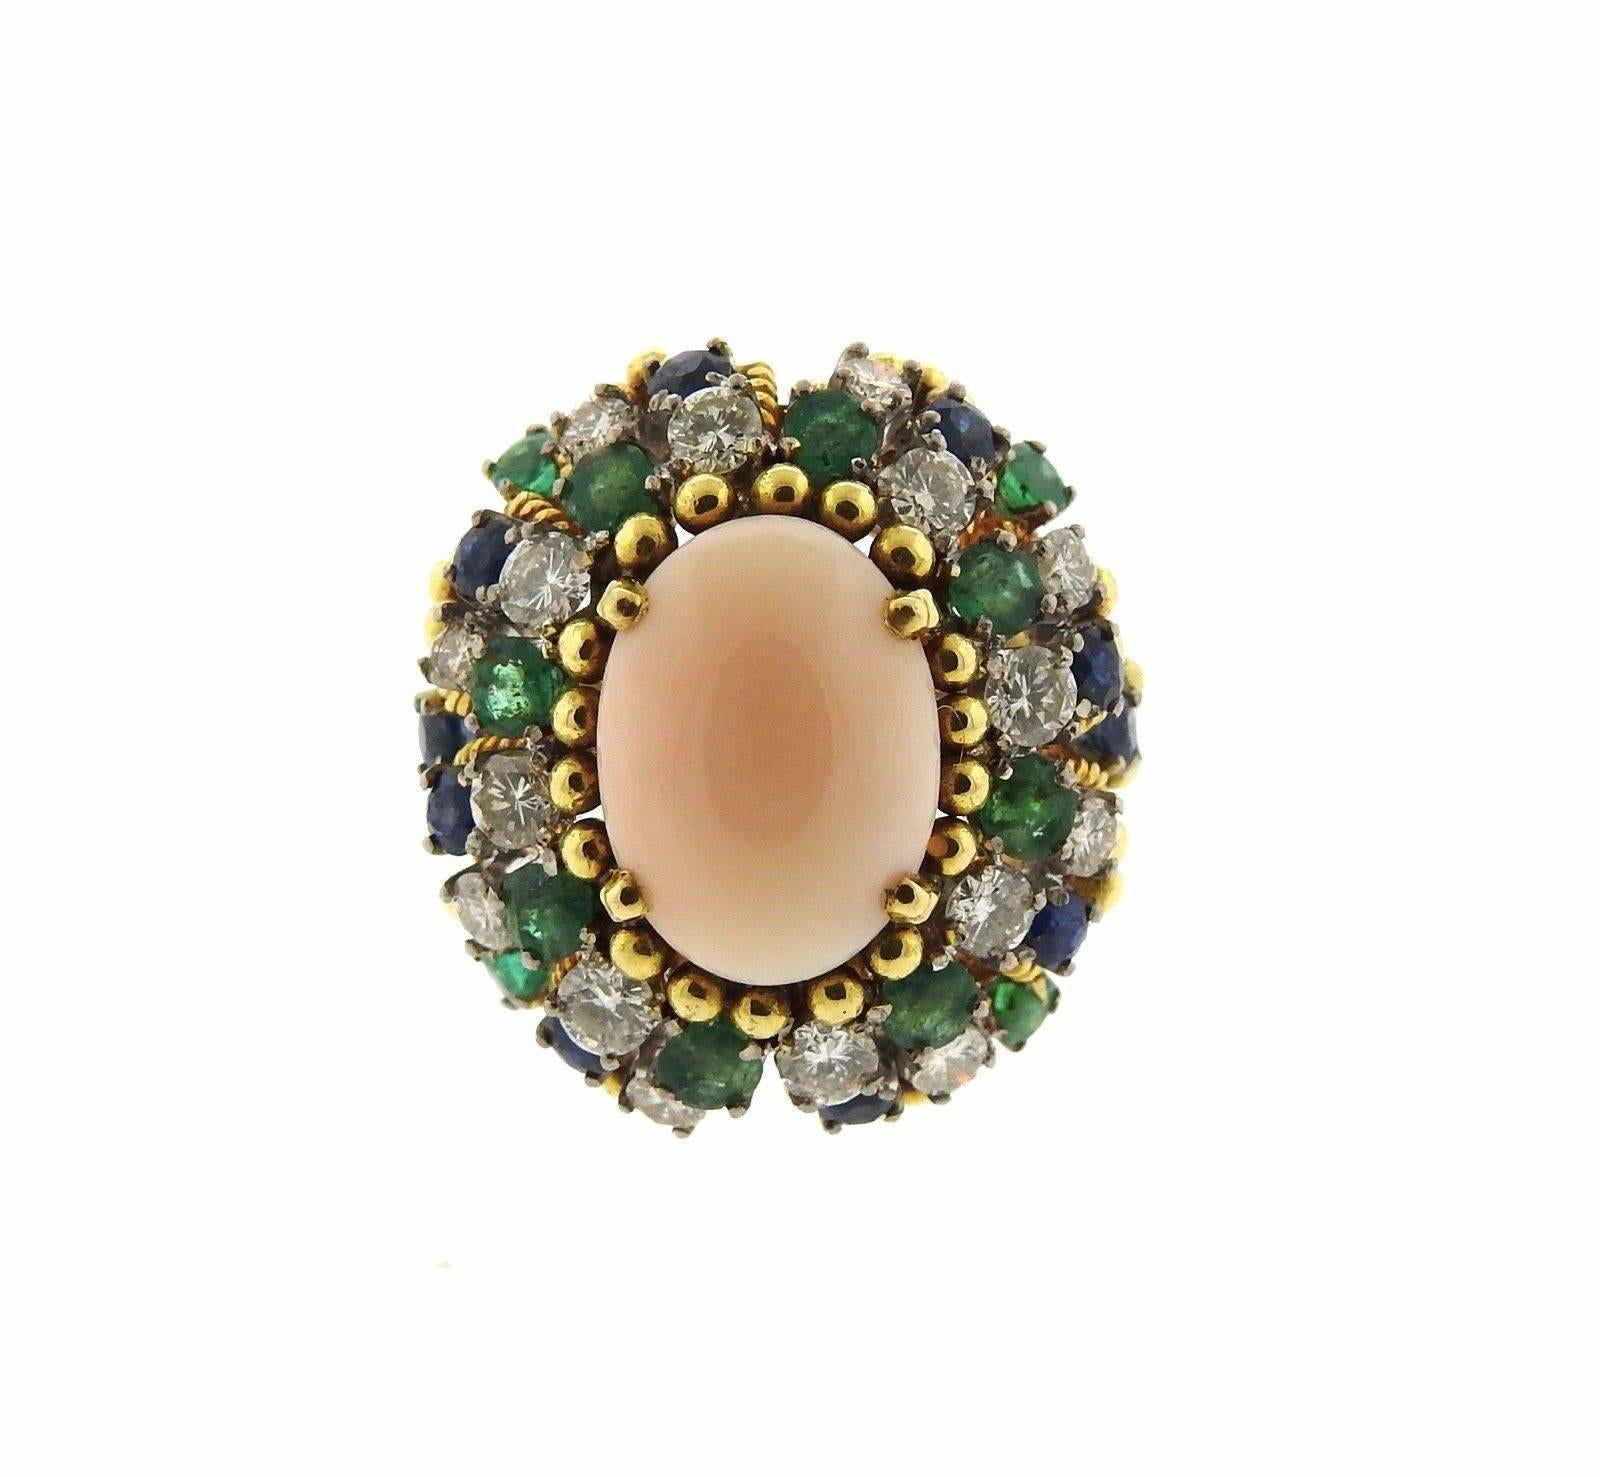 Lovely 18k Gold angel skin coral ring from the 1960's featuring 1.20ctw in diamonds, emeralds, and sapphires. Ring is a size - 6, measures 24mm at widest point. Marked 18k and weighs 21.1 grams. 